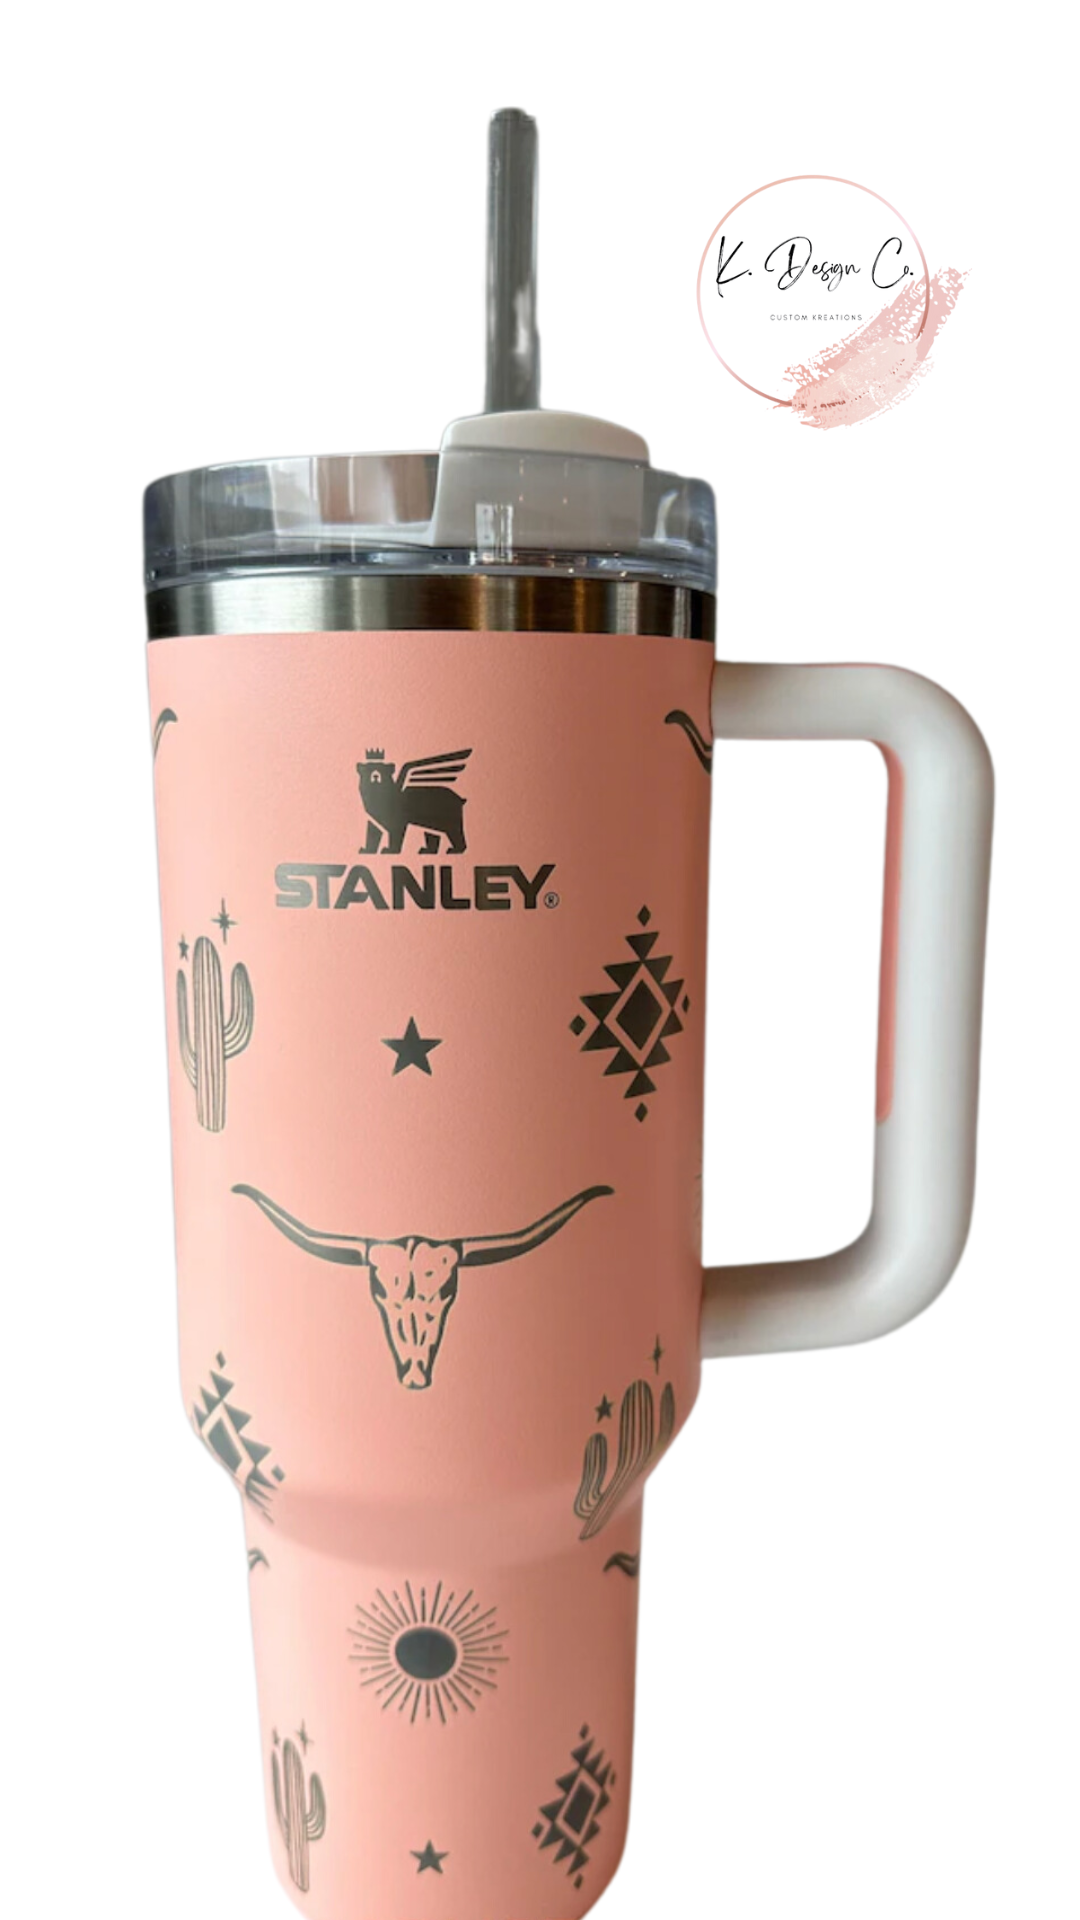 Engraved Stanley Quencher, Engraved Stanley Cup, 30 Oz Stanley, 40